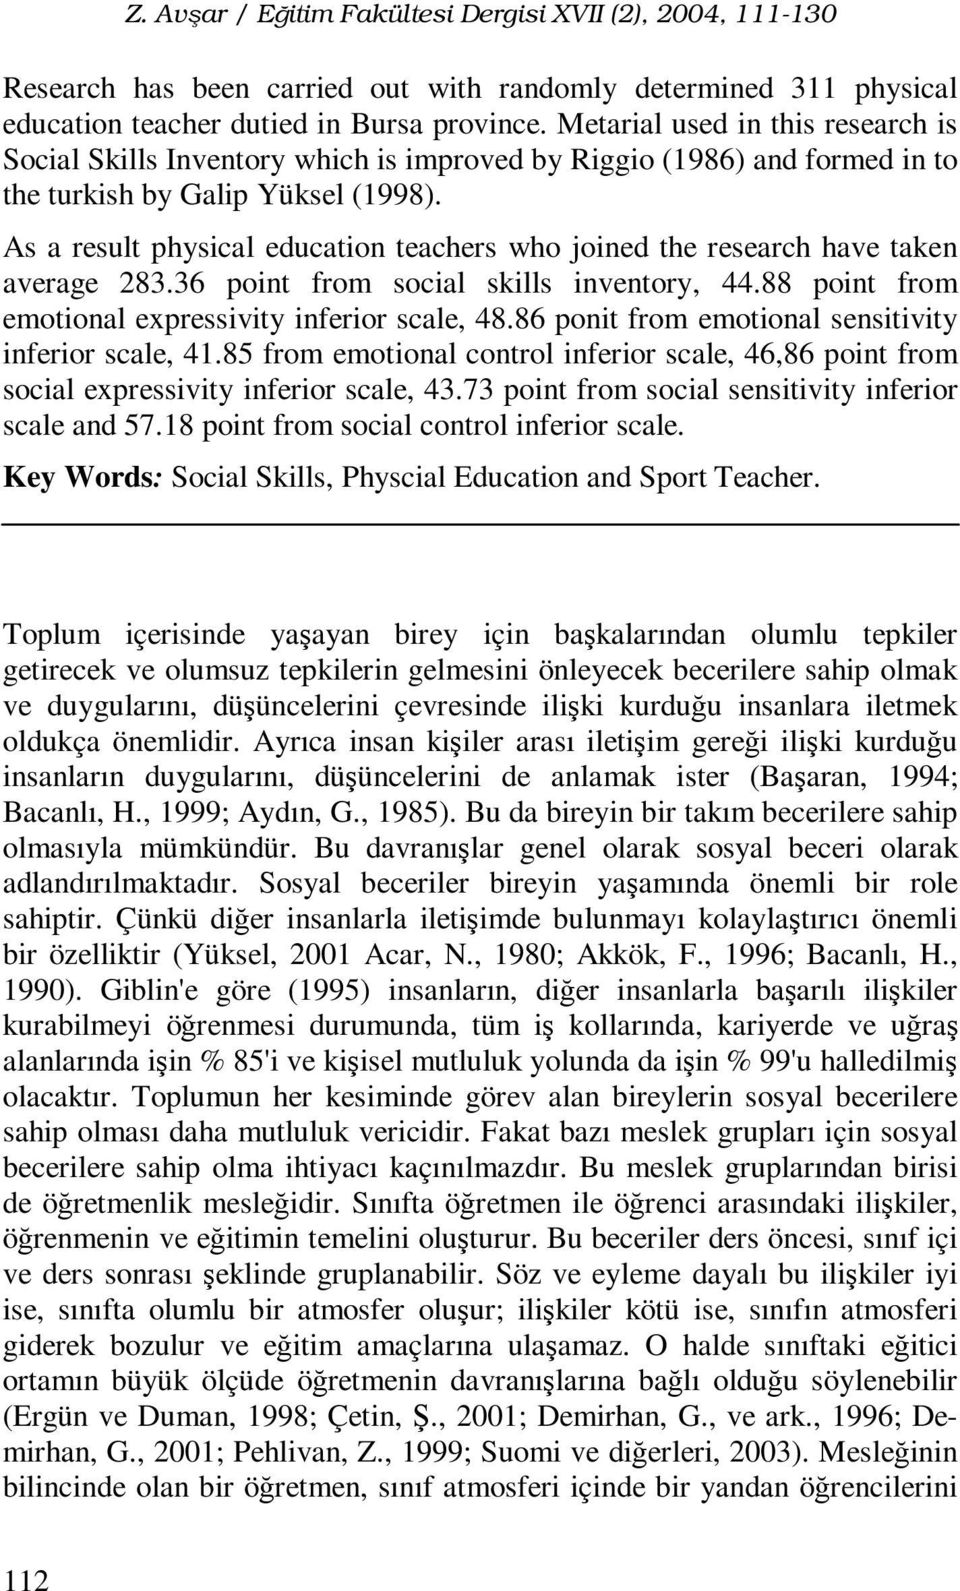 As a result physical education teachers who joined the research have taken average 283.36 point from social skills inventory, 44.88 point from emotional expressivity inferior scale, 48.